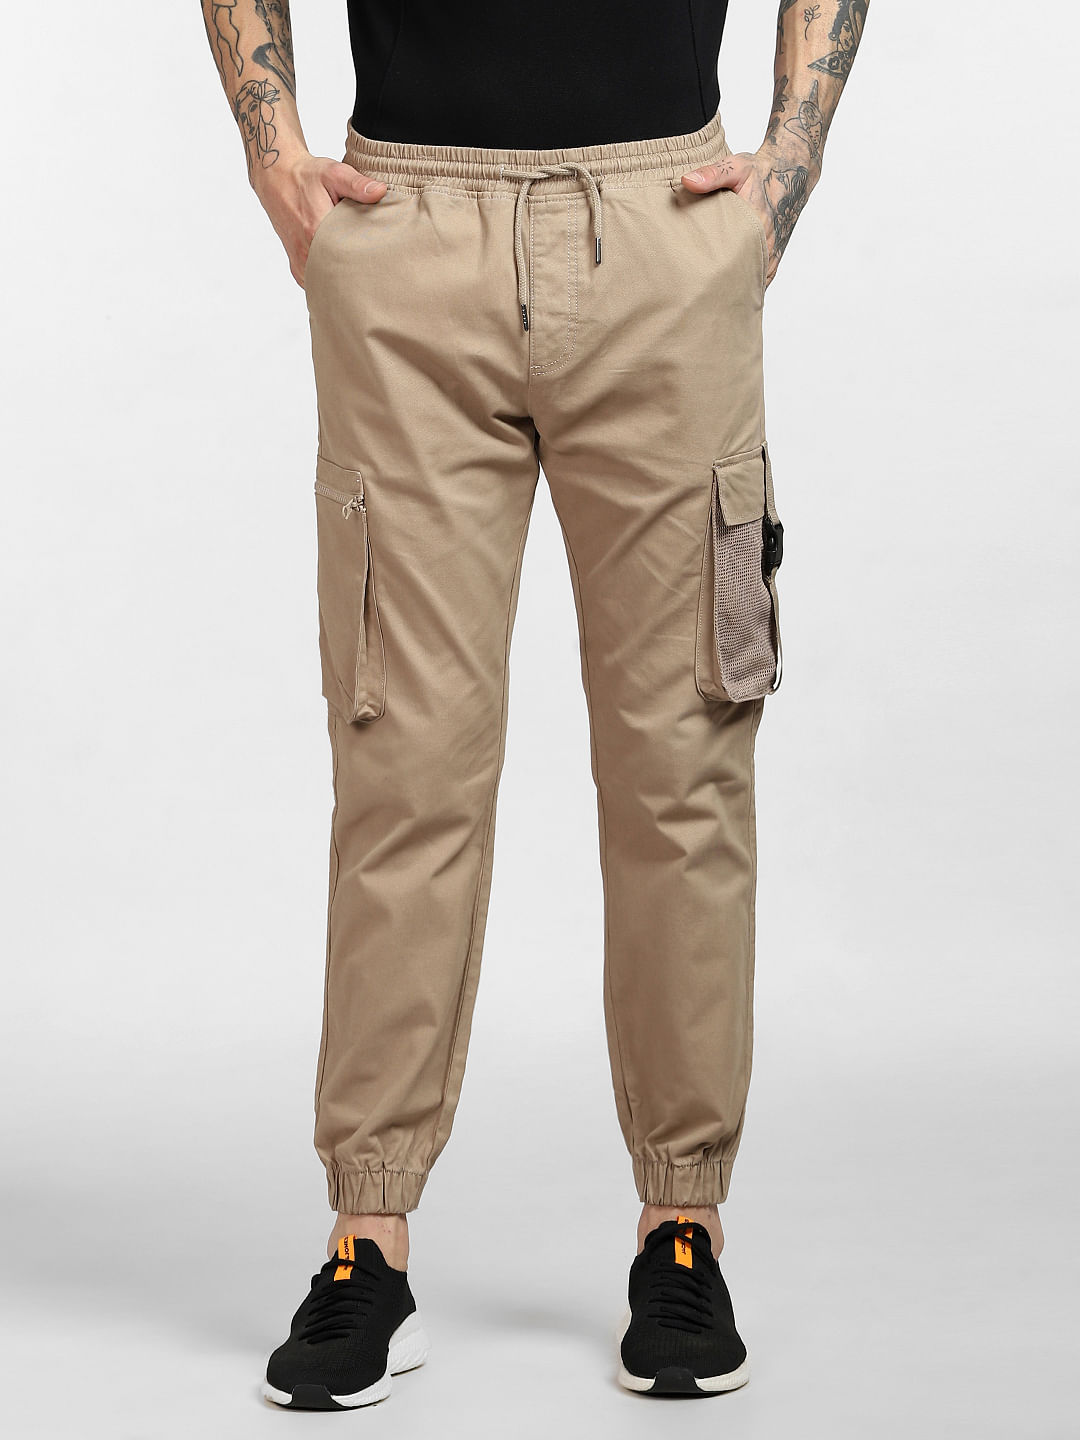 Plain Mens Fire Resistant Safety Pant, Size: 26-44 at Rs 455/unit in  Ahmedabad